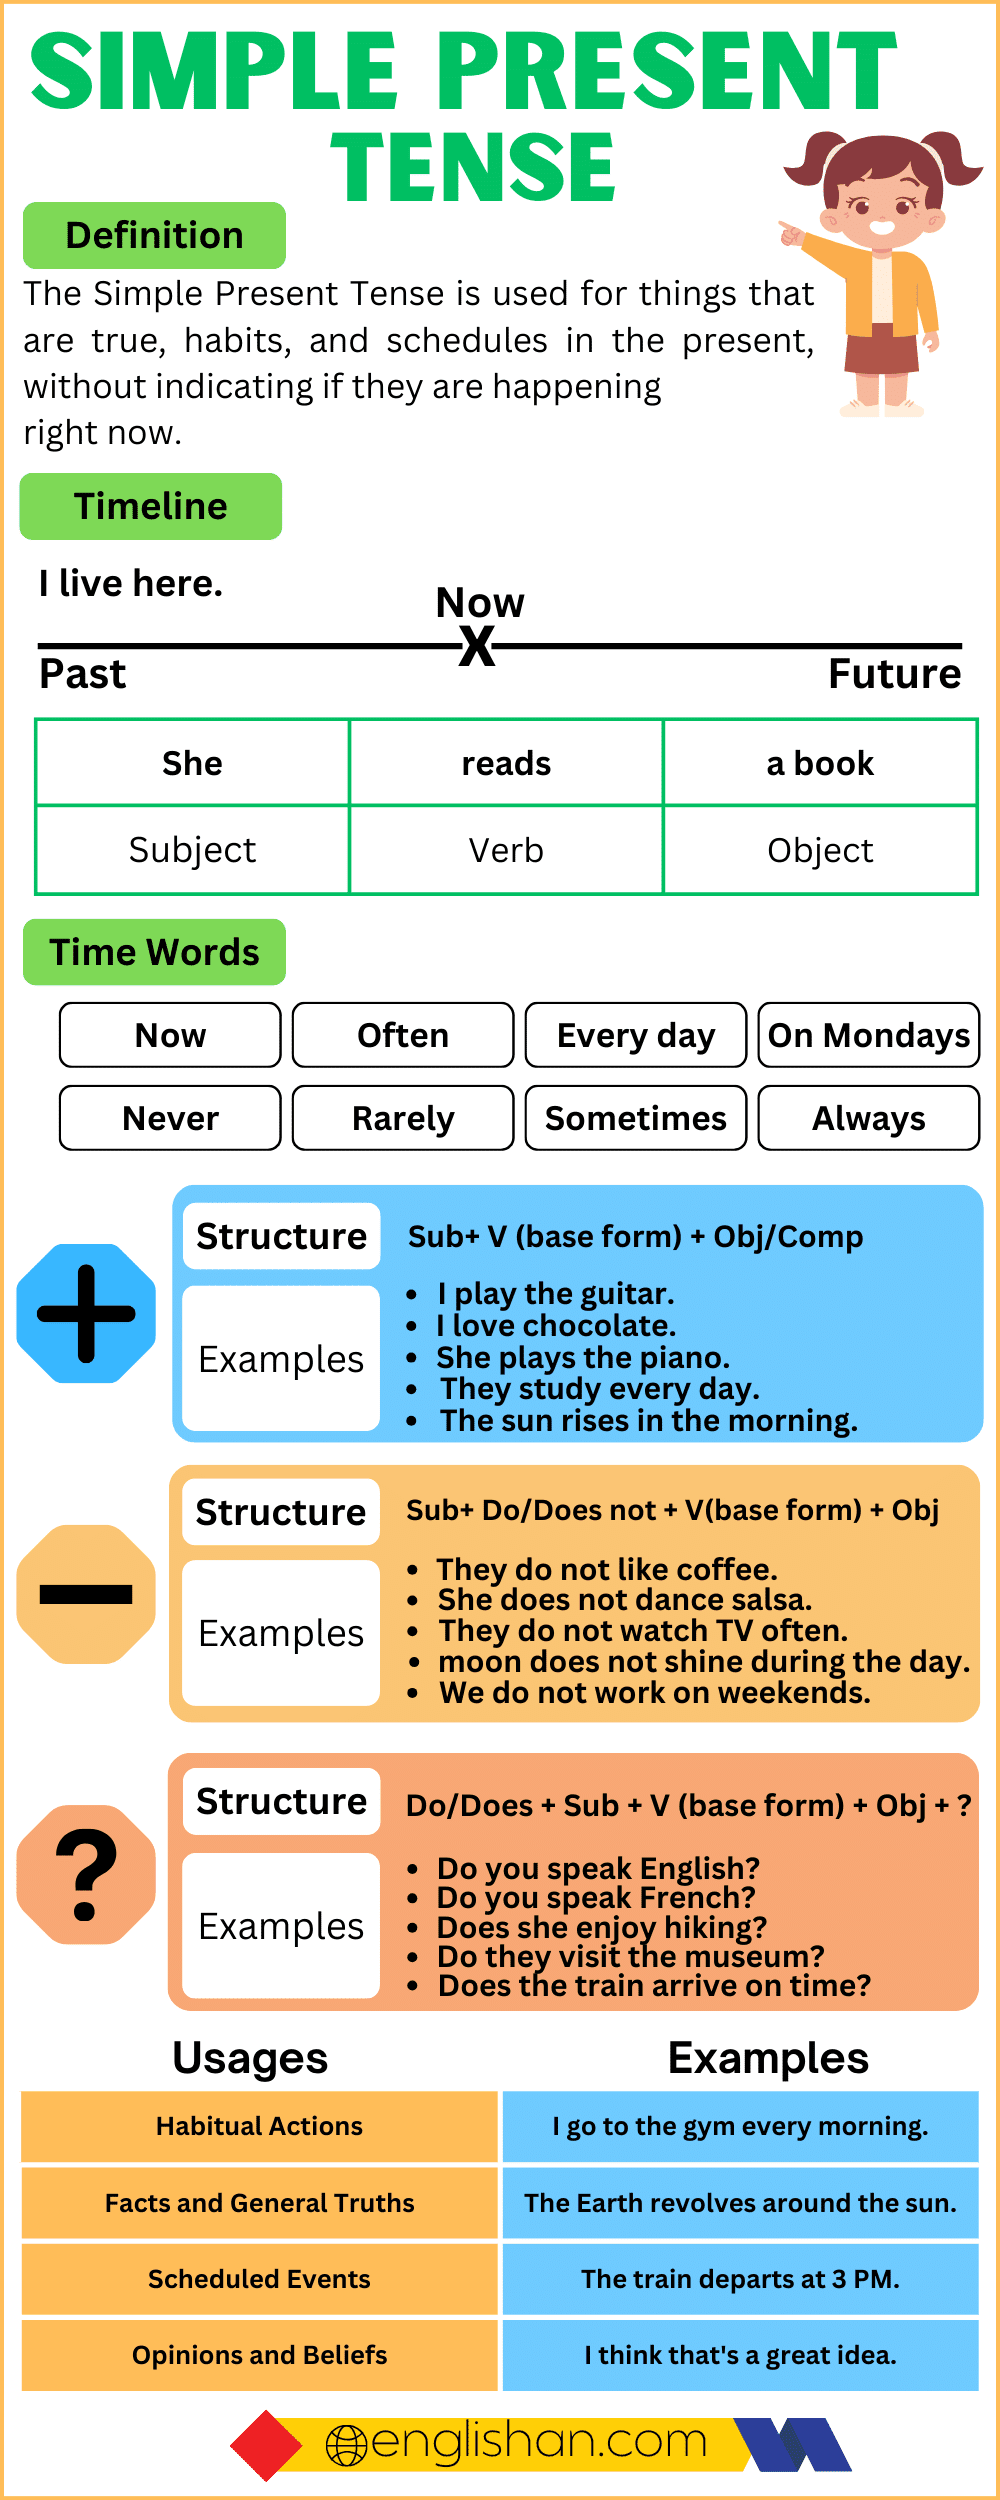 Simple Present Tense with Examples, Definition, Structure, Rules, Times Words, and Usages in English